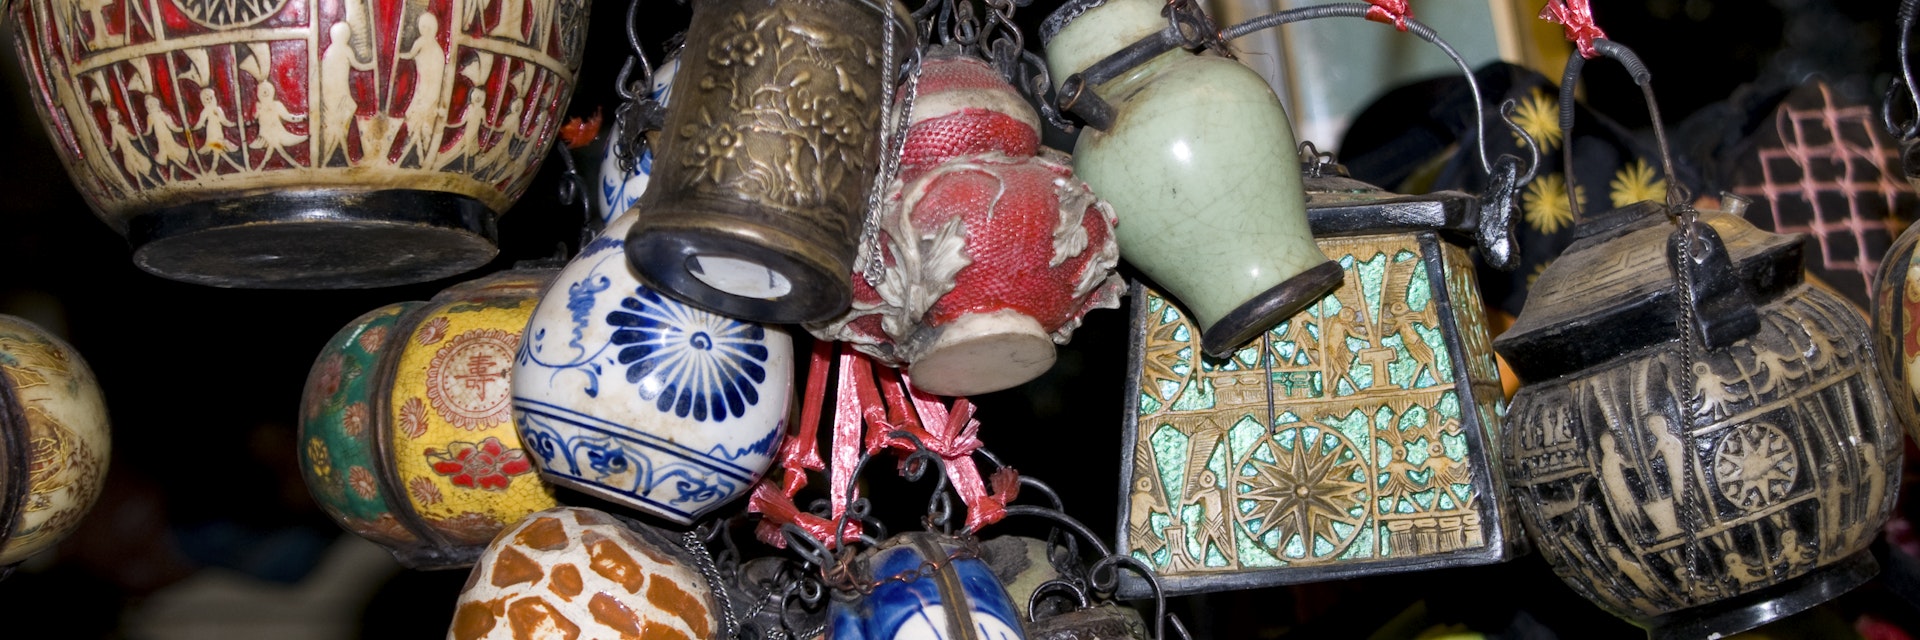 Bells and other treasures hanging in the Russian Market in Phnom Penh, Cambodia